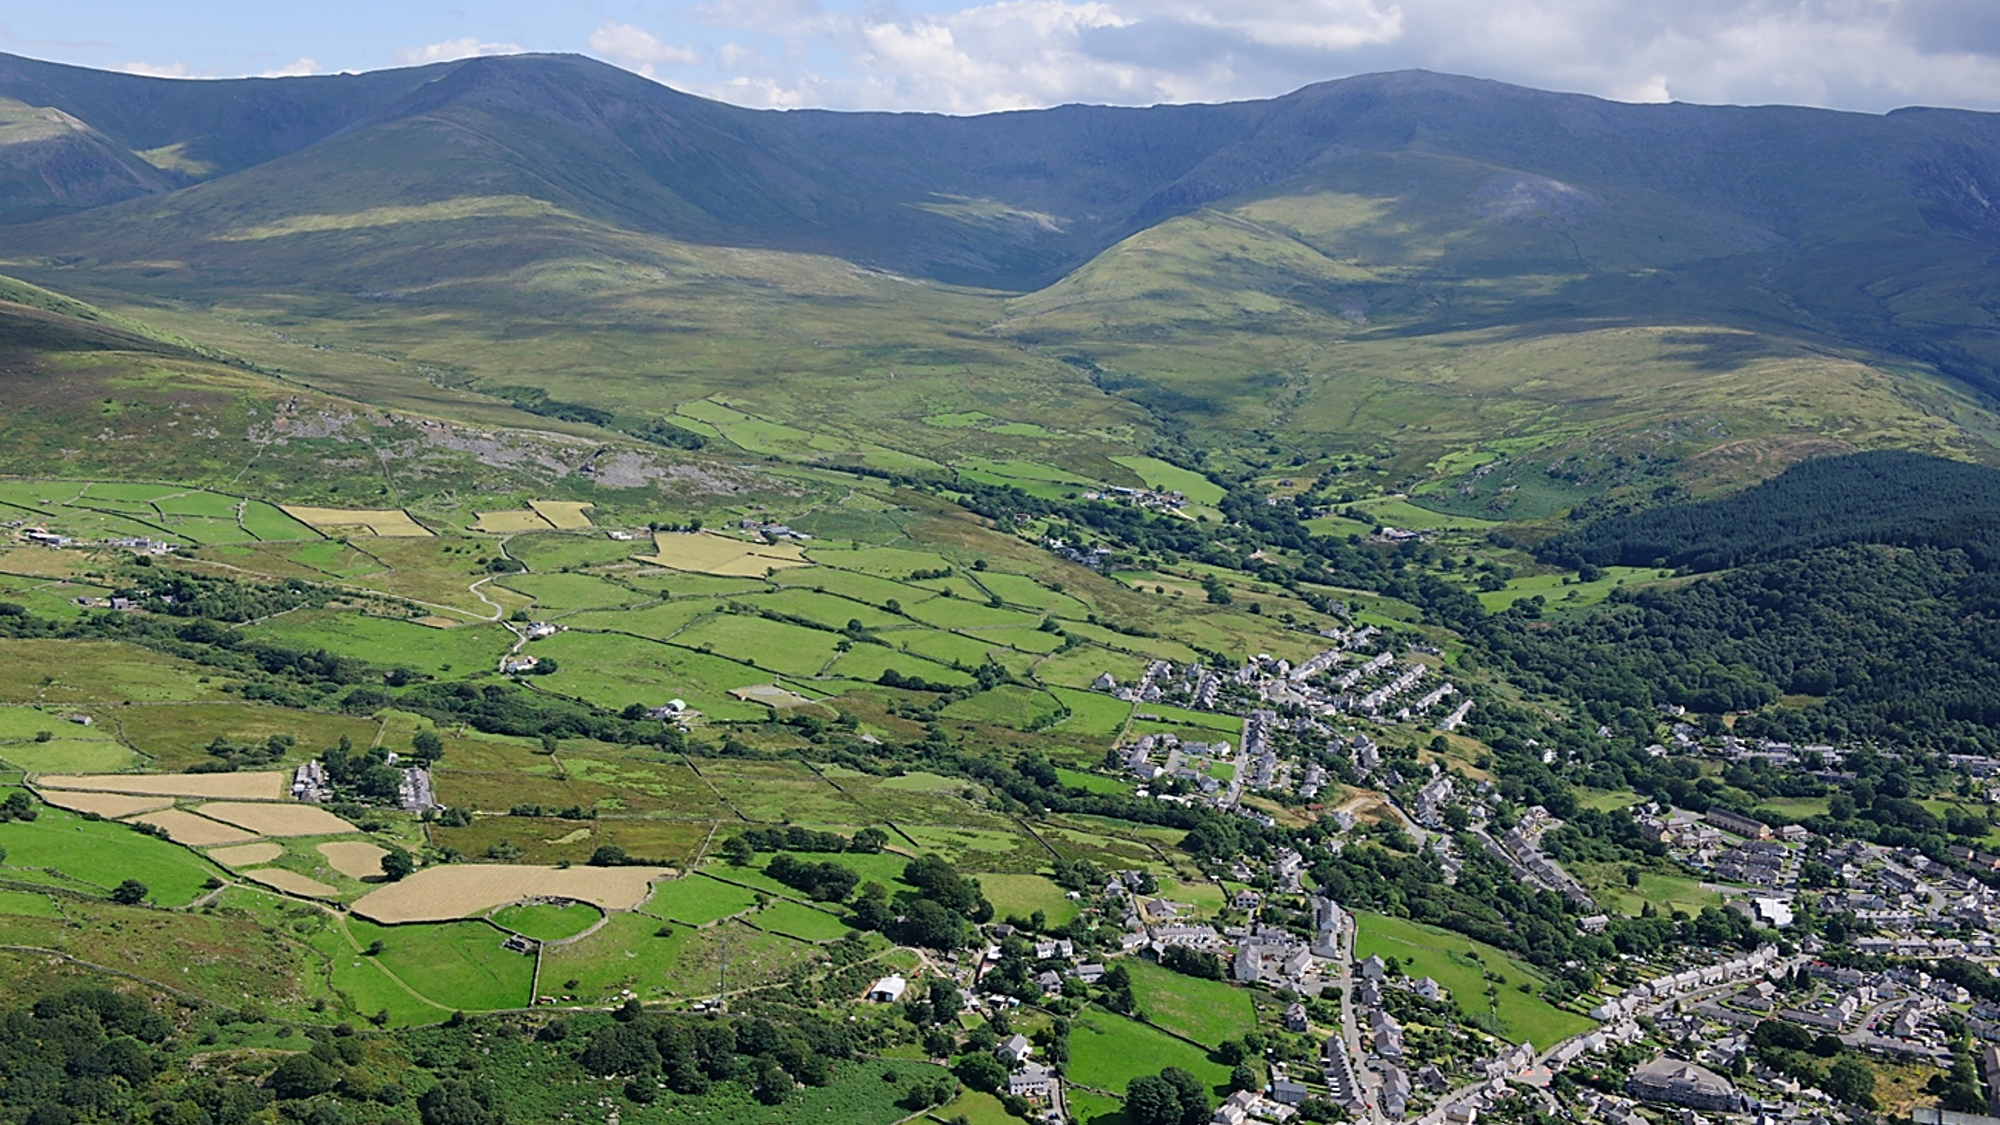 Bethesda and the surrounding communities with Carnedd Llewelyn and Carnedd Dafydd in the background